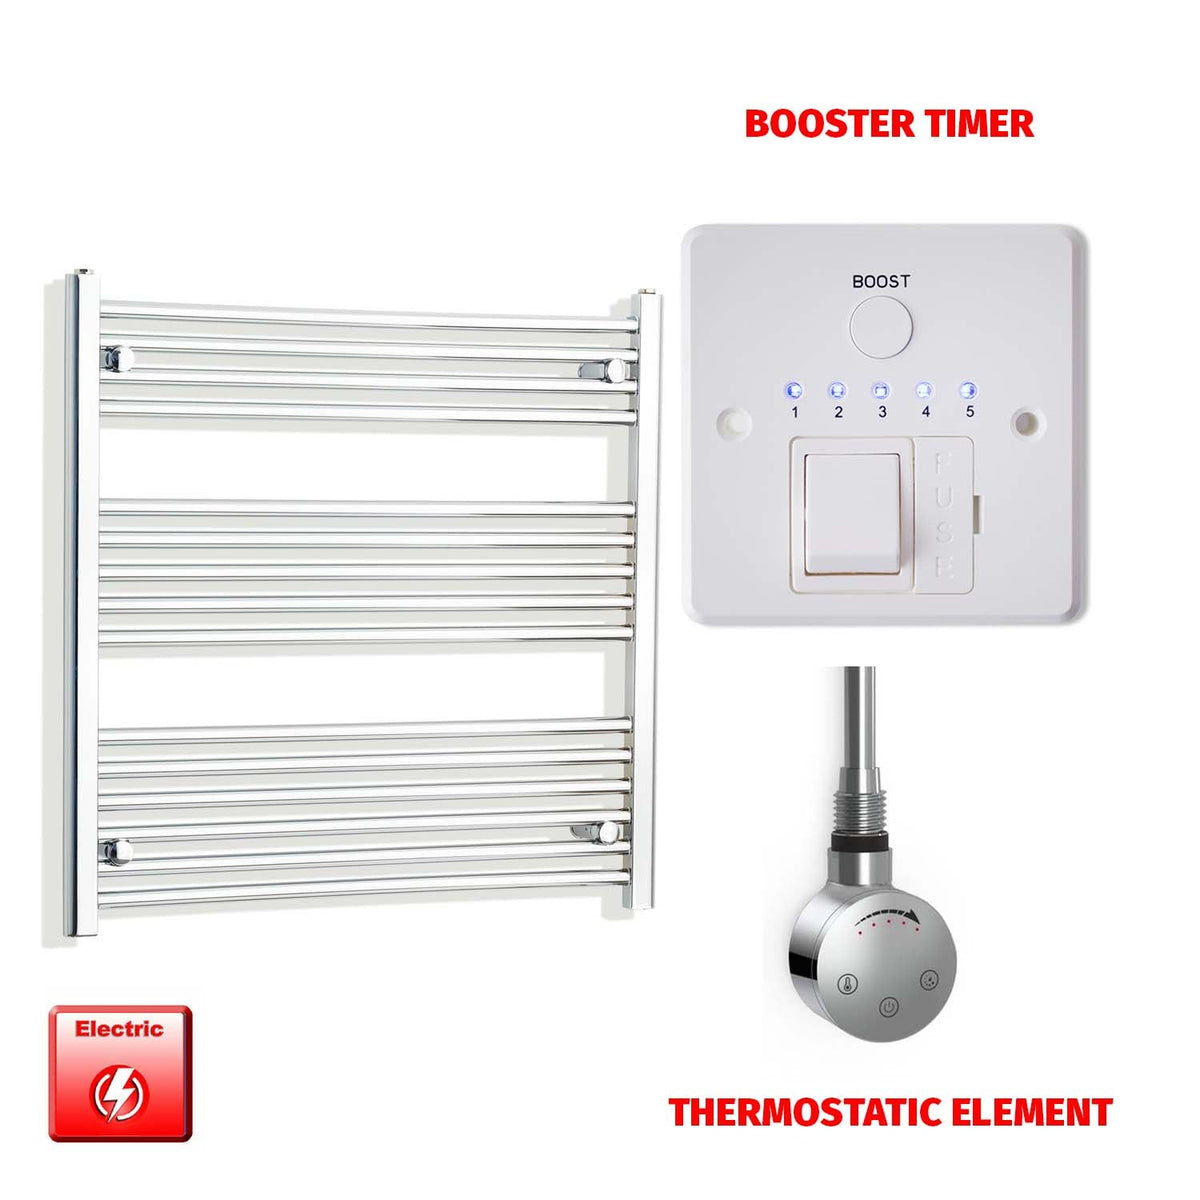 800mm High 850mm Wide Pre-Filled Electric Heated Towel Rail Radiator Straight Chrome SMR Thermostatic element Booster timer